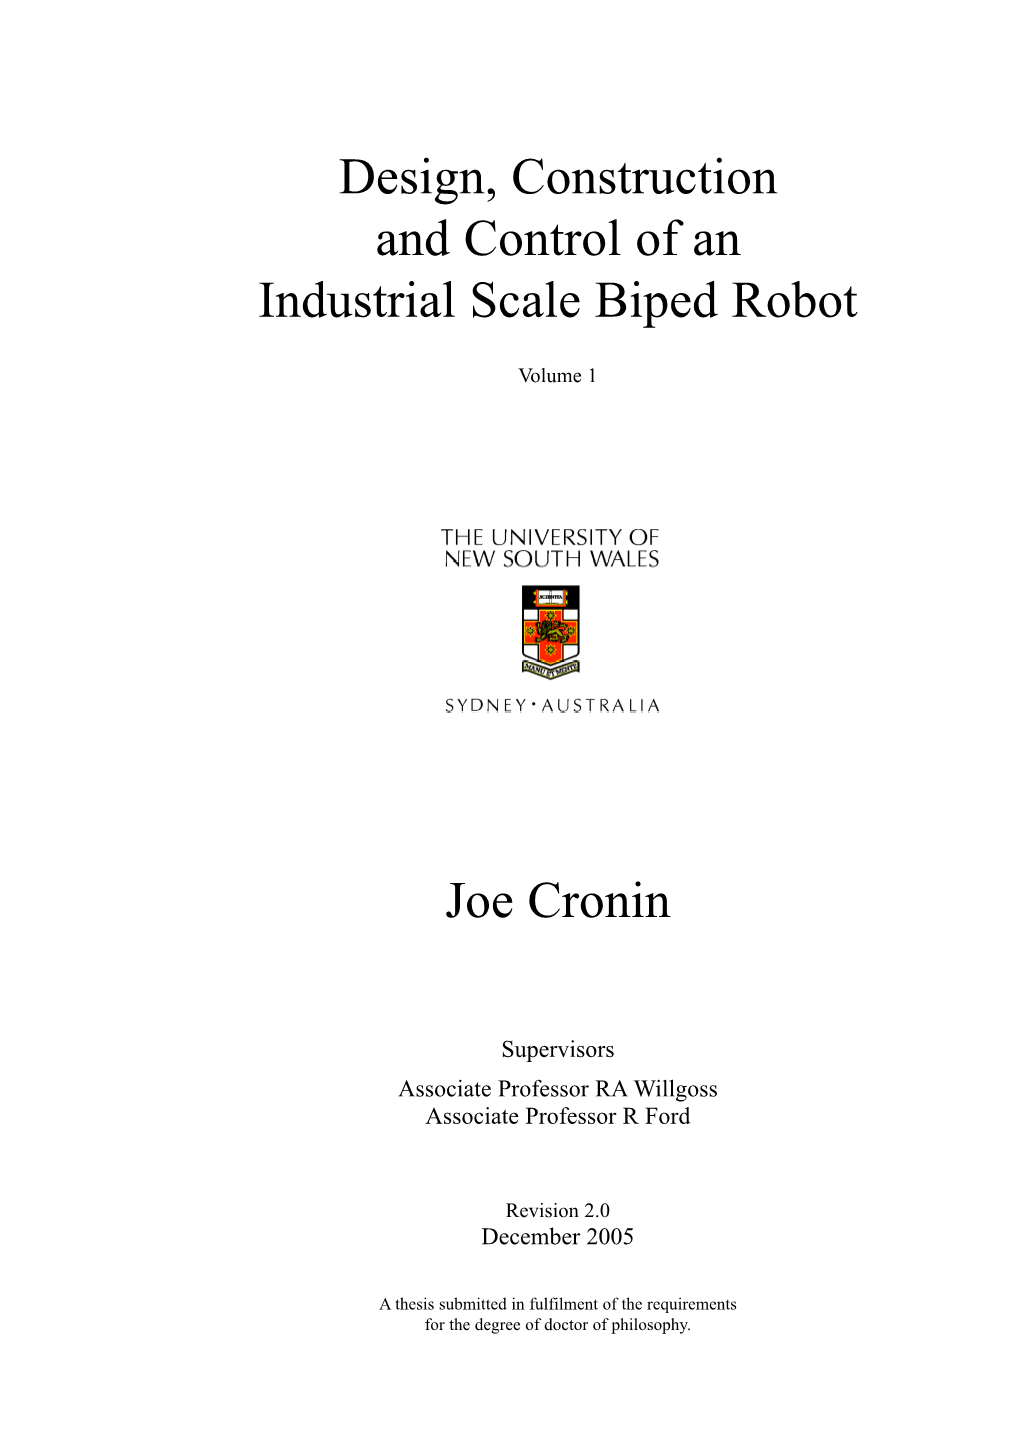 Design, Construction and Control of an Industrial Scale Biped Robot Joe